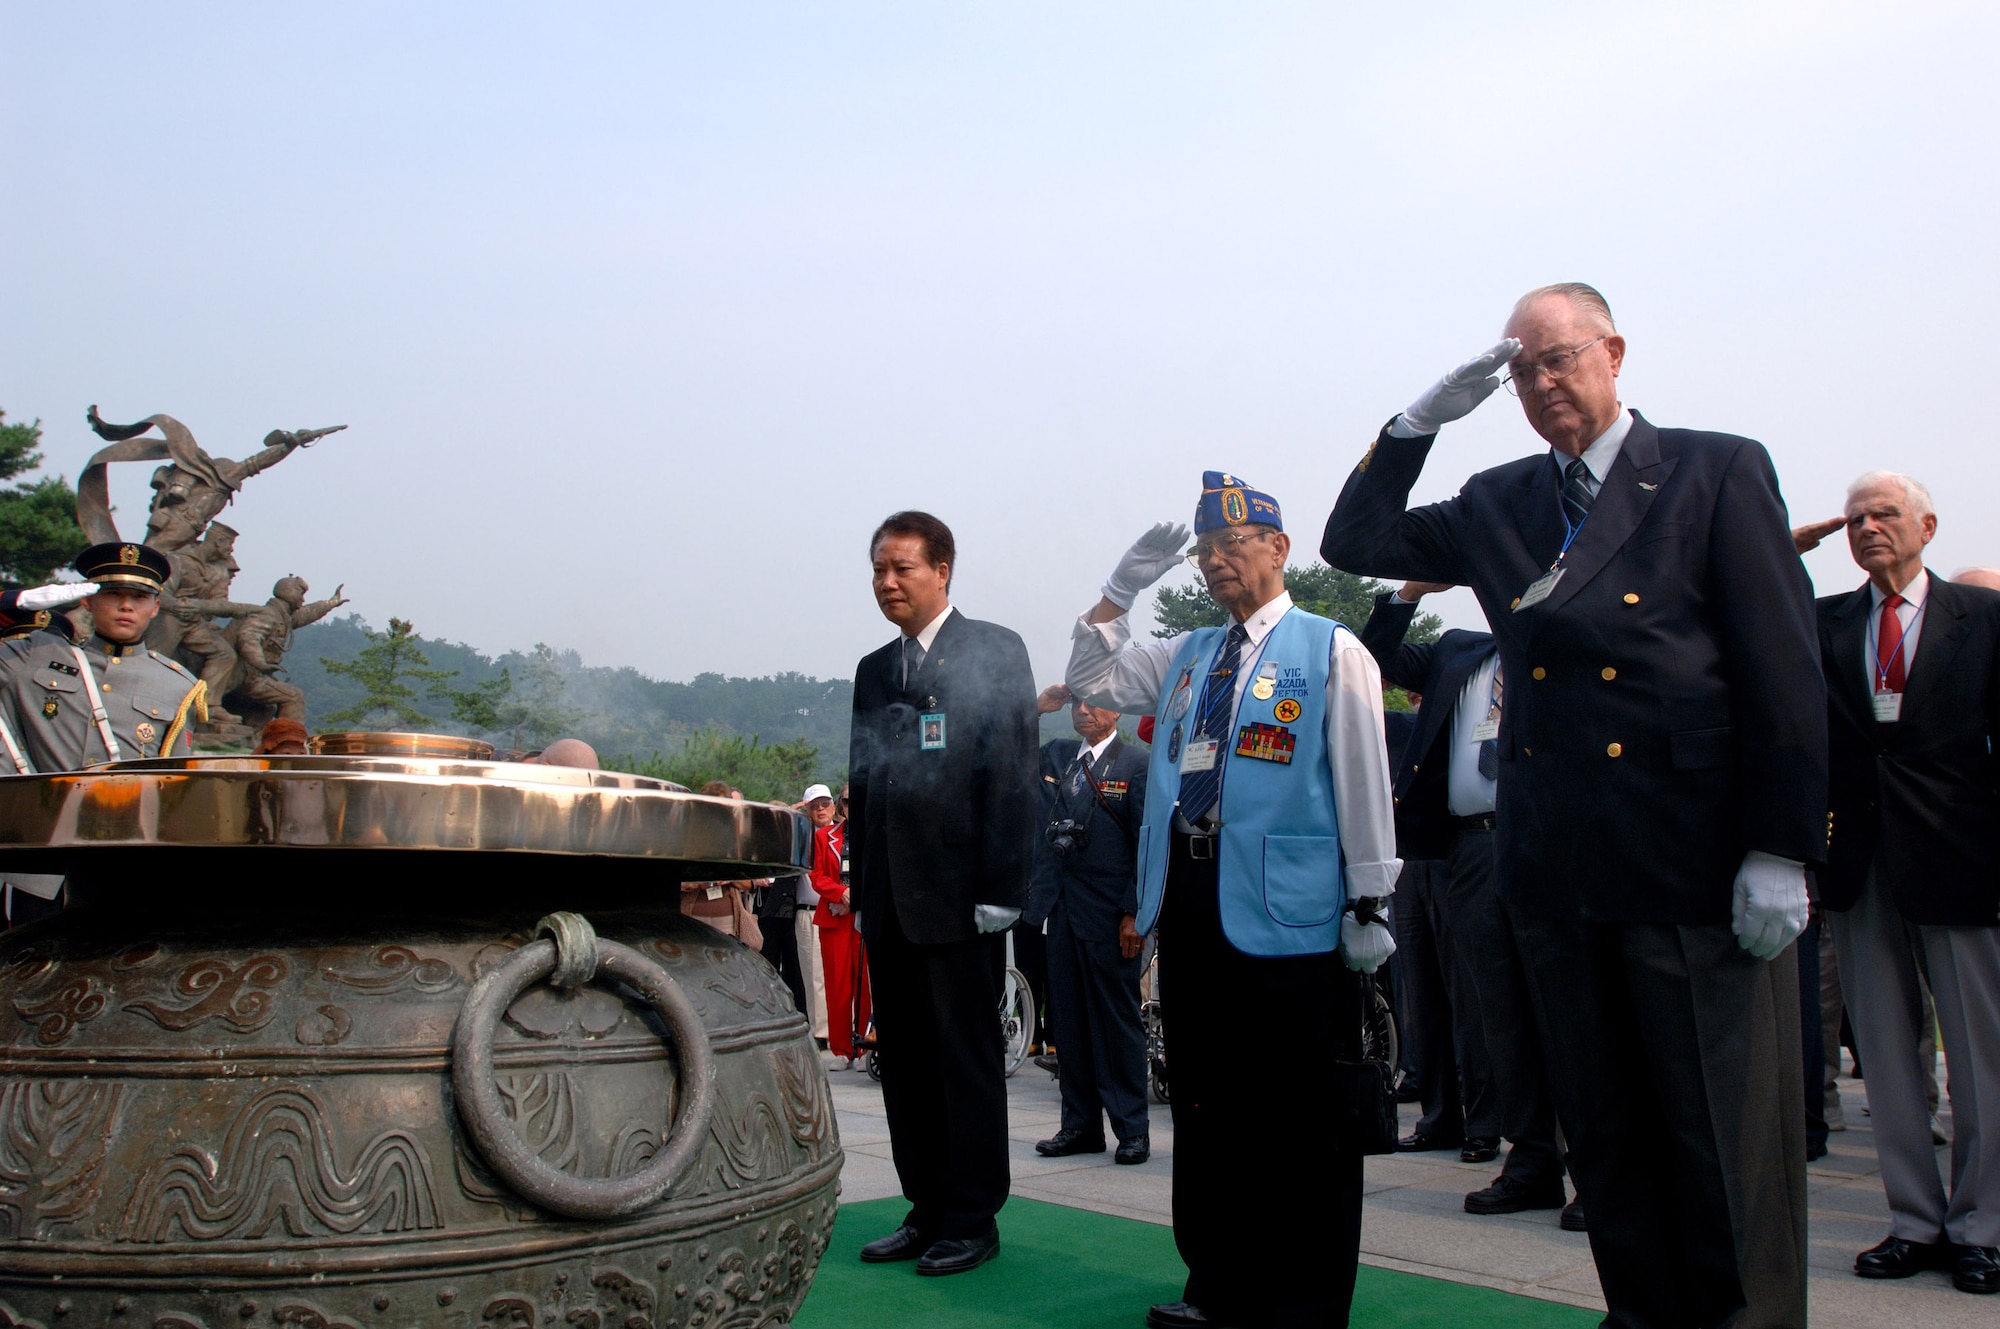 Retired Maj. Gen. Carl G. Schneider (right) and retired Philippines Gen. Vic Azada (Center) salute to honor the lost men and women of the Korean War after a wreath-laying ceremony at the South Korean National Cemetery attended by more than 200 war veterans and family members Sept. 12. The South Korean government's Revisit Korea program invites war veterans each year to come to South Korea to honor the men and woman from 21 countries who served during the Korean War. Nearly 25,000 veterans have participated in this program since 1975. (U.S. Air Force photo/Staff Sgt. Bennie J. Davis III)